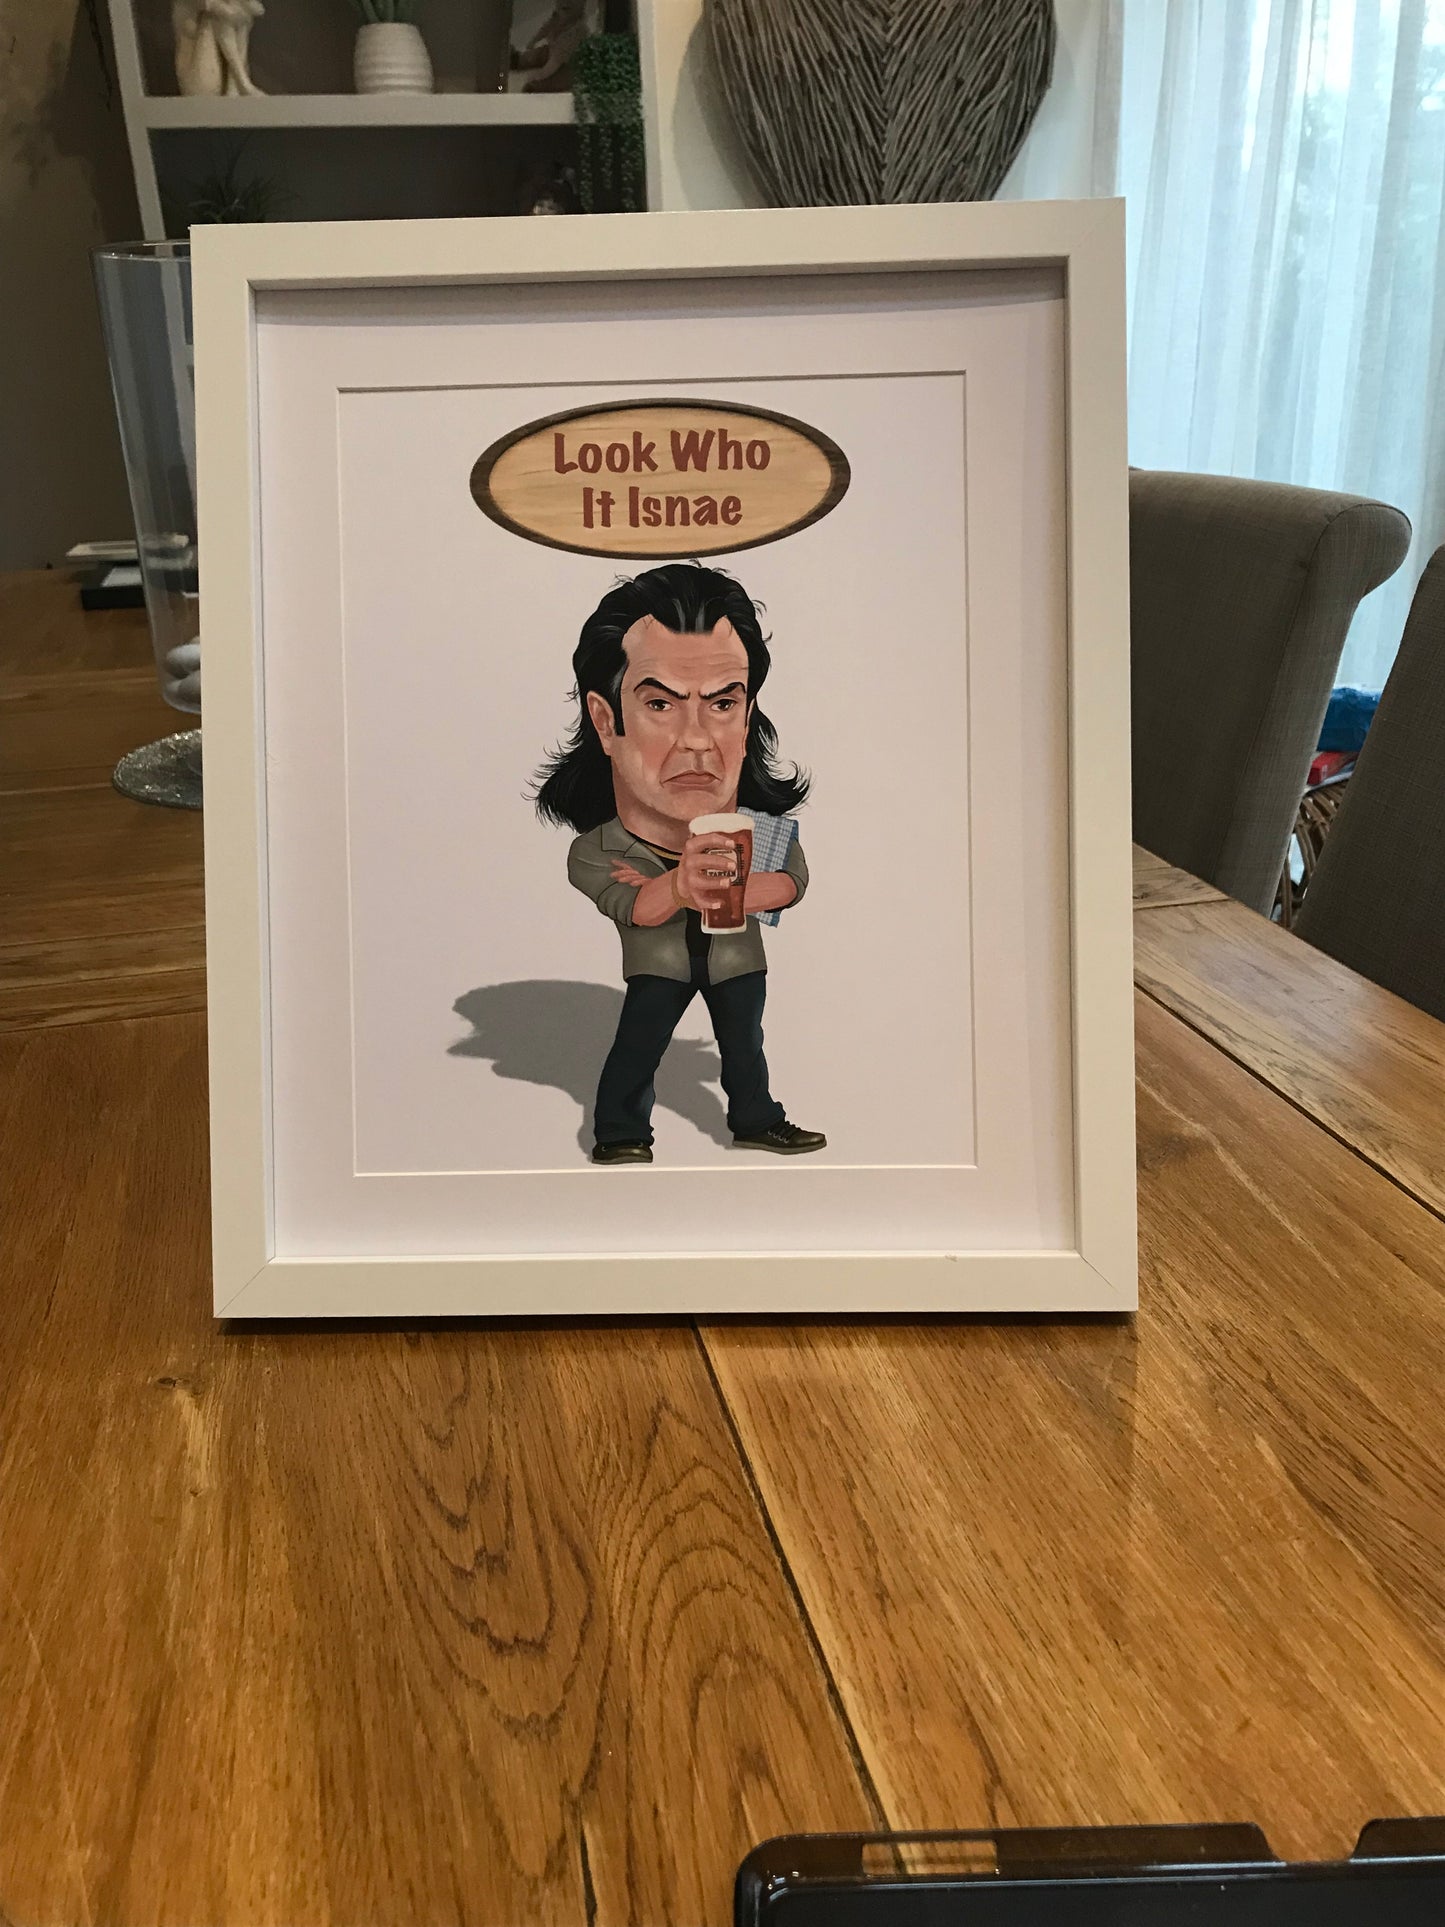 Still Games A4 Prints-Prints boaby the barman look who it Isnae